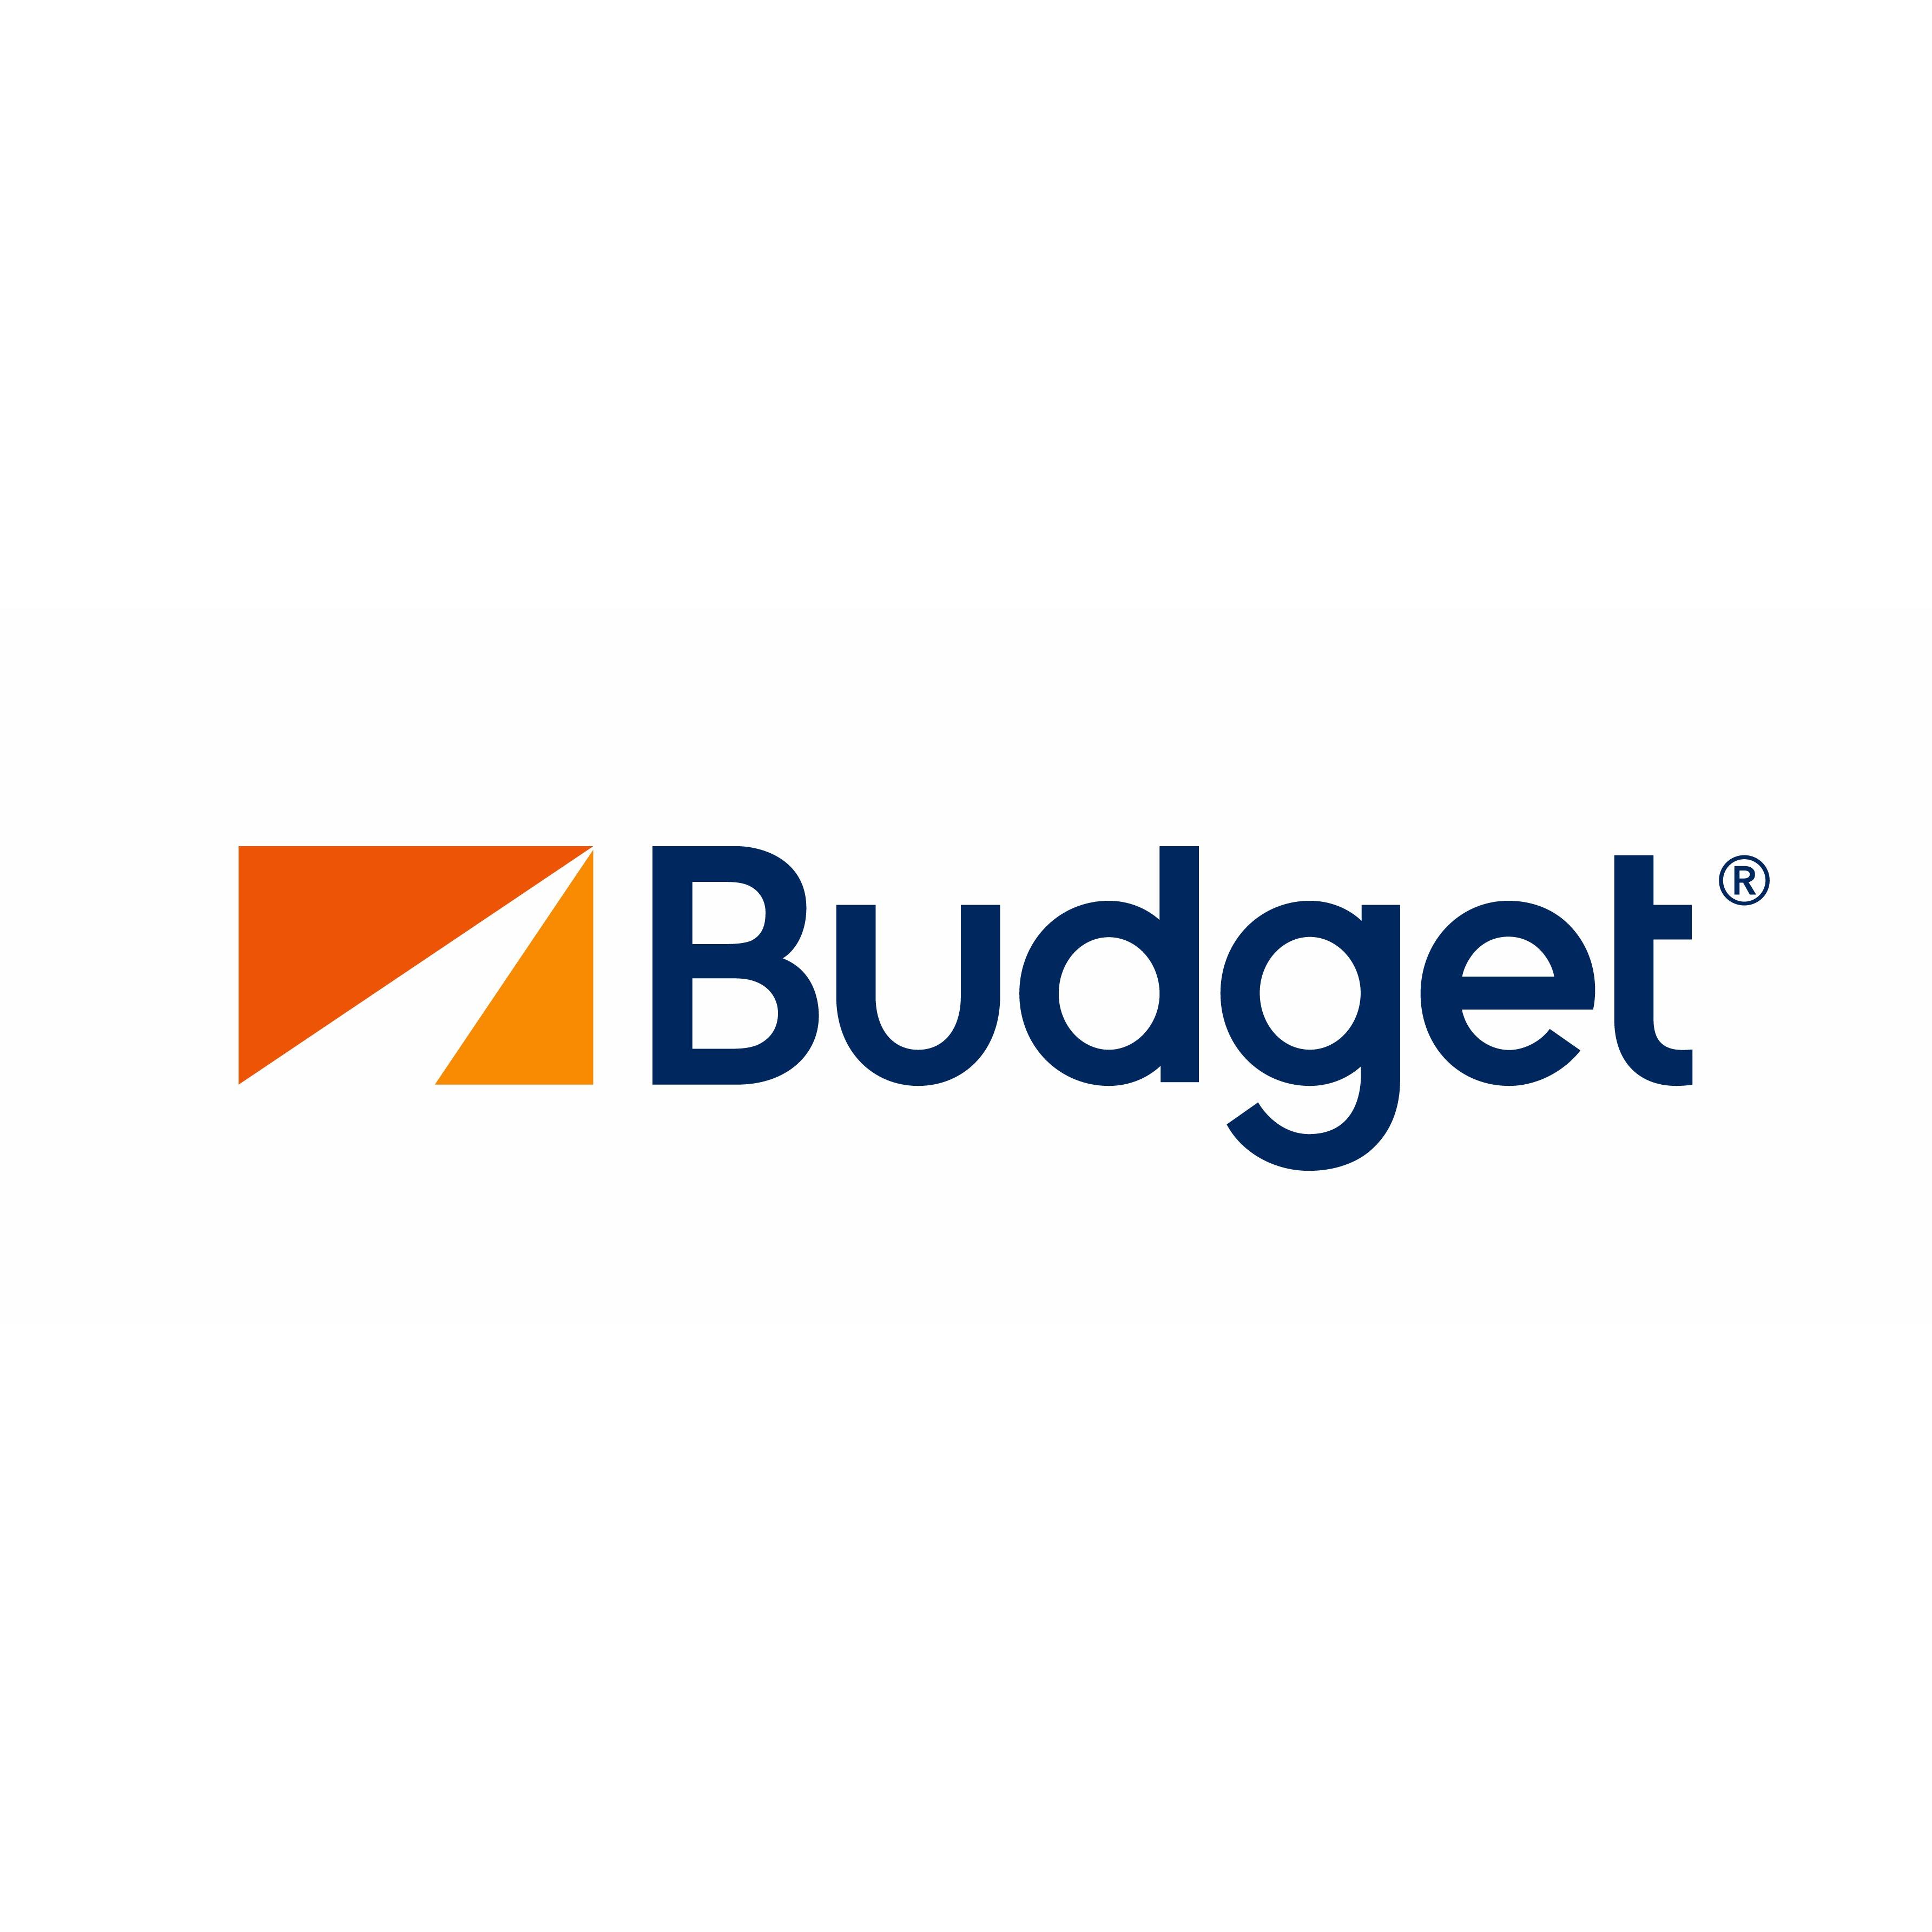 Budget Car and Truck Rental - Closed